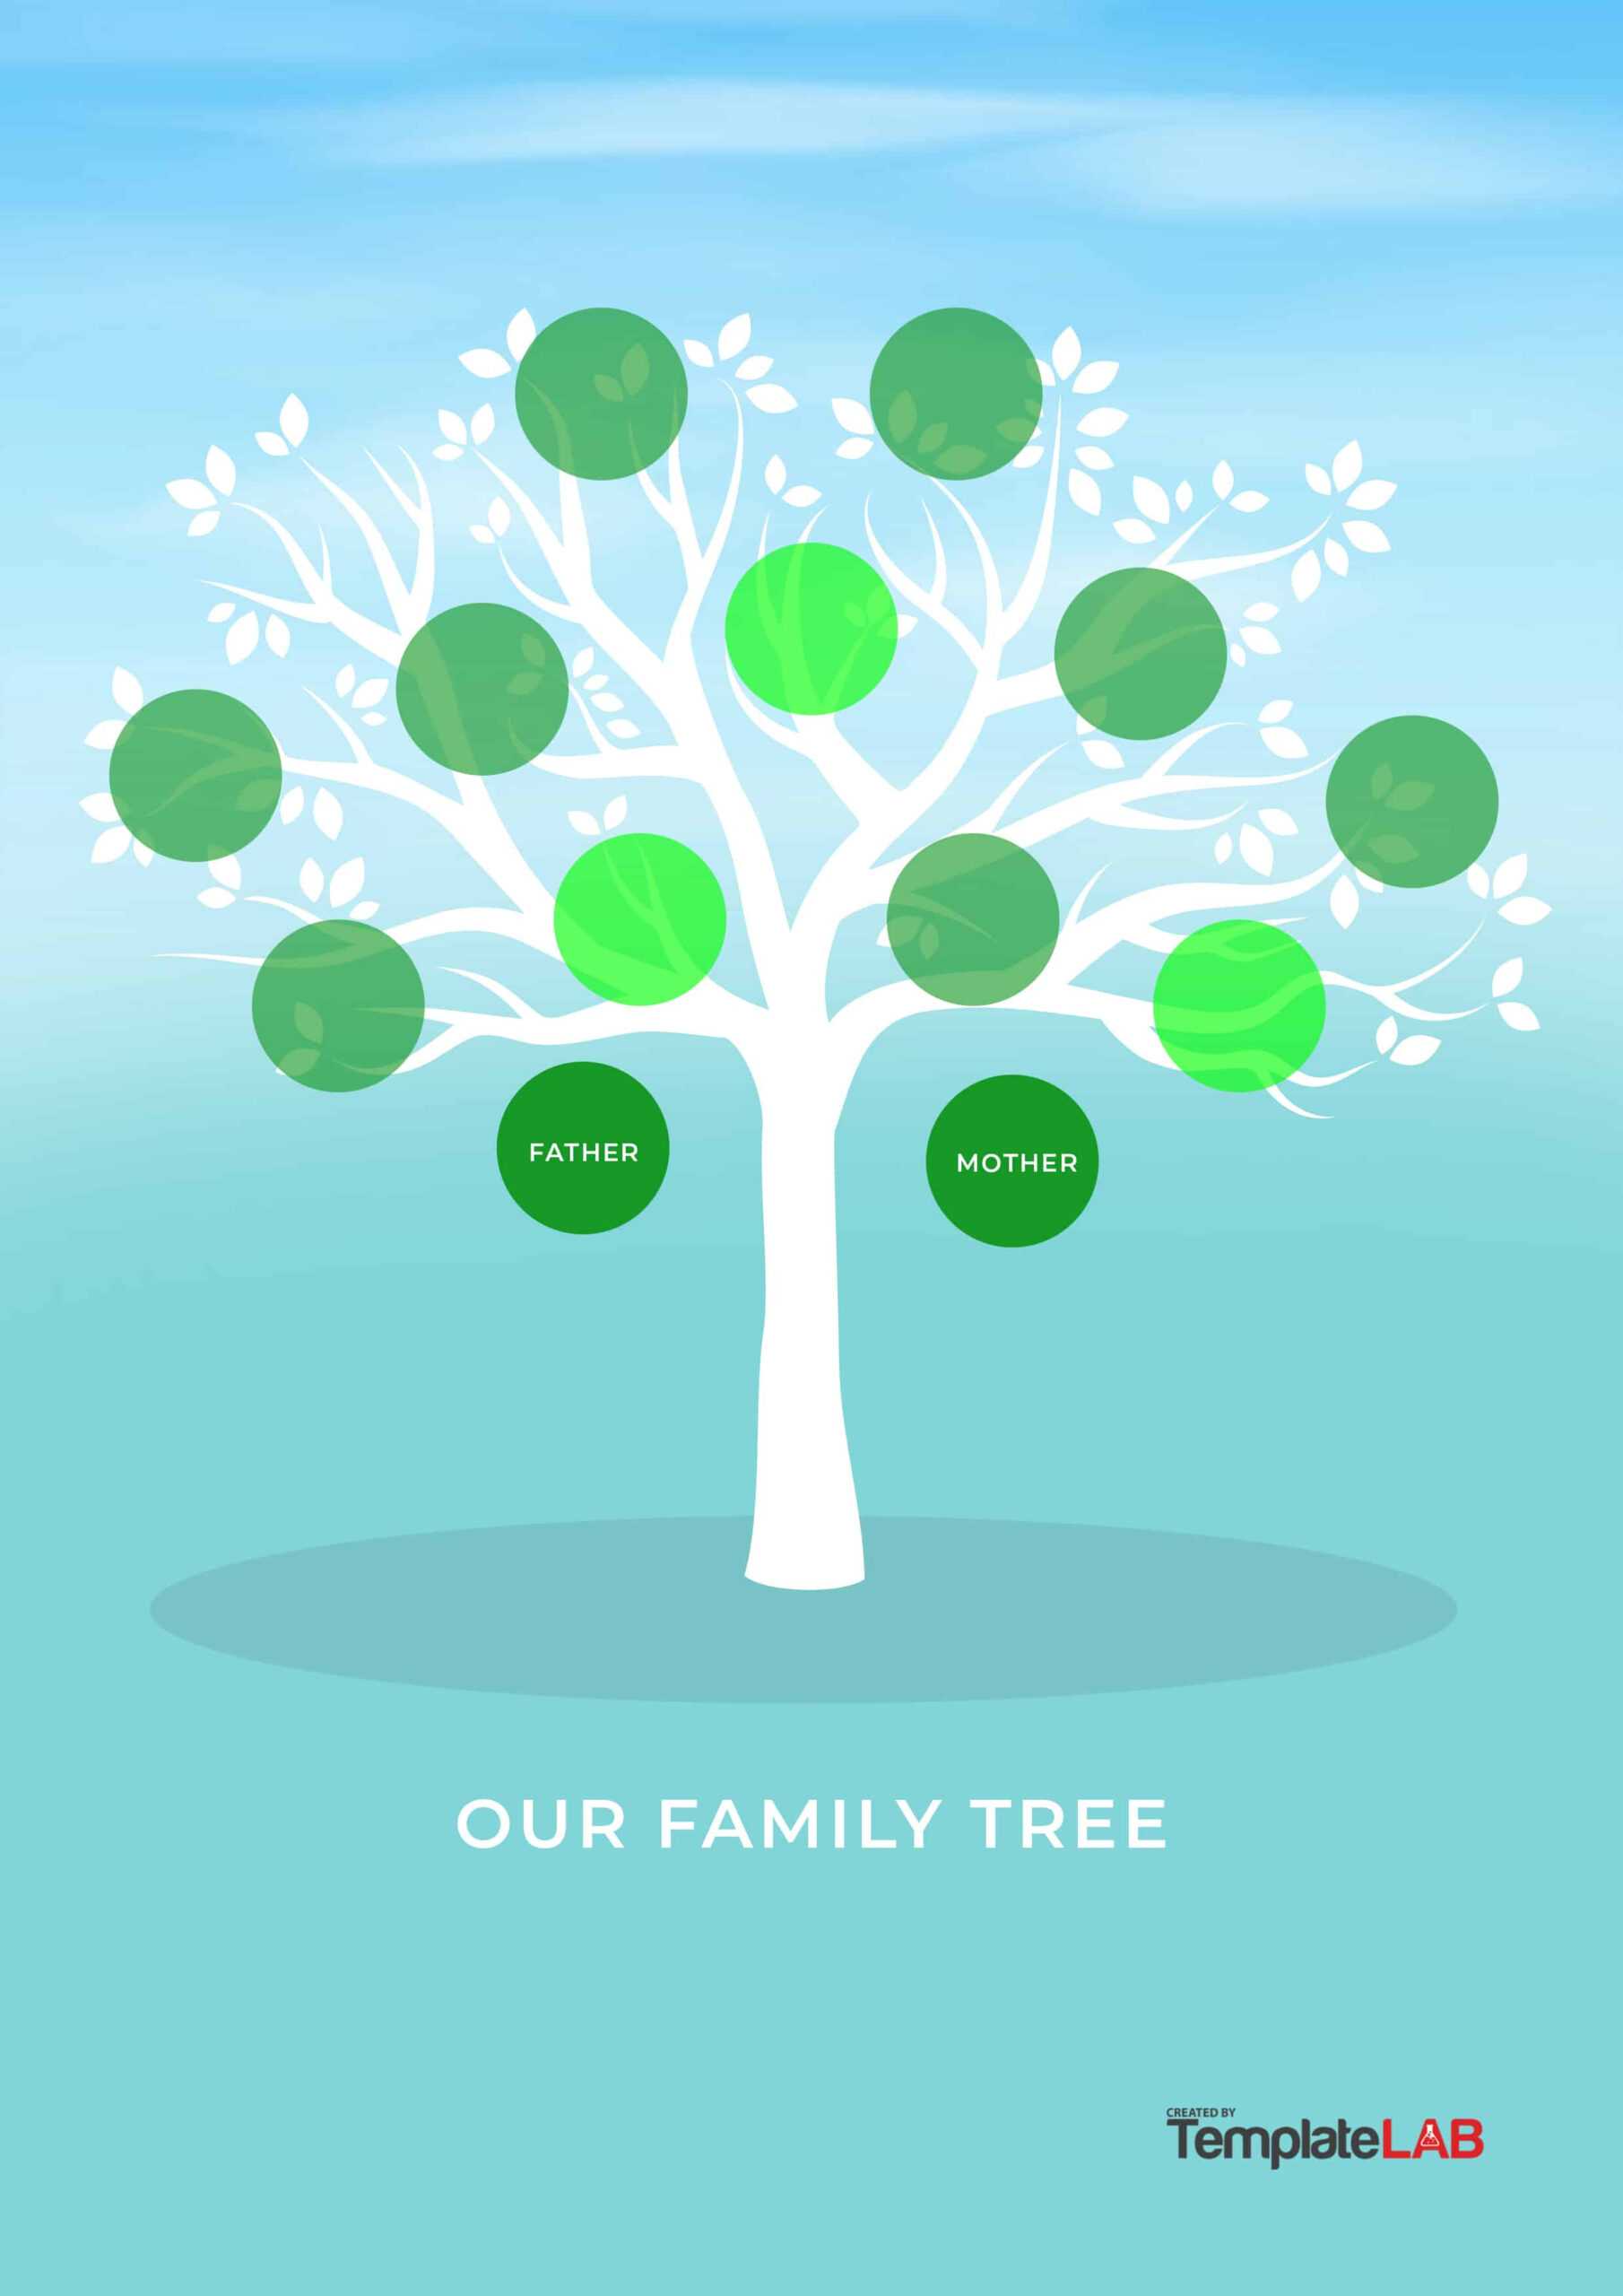 50+ Free Family Tree Templates (Word, Excel, Pdf) ᐅ With Regard To 3 Generation Family Tree Template Word